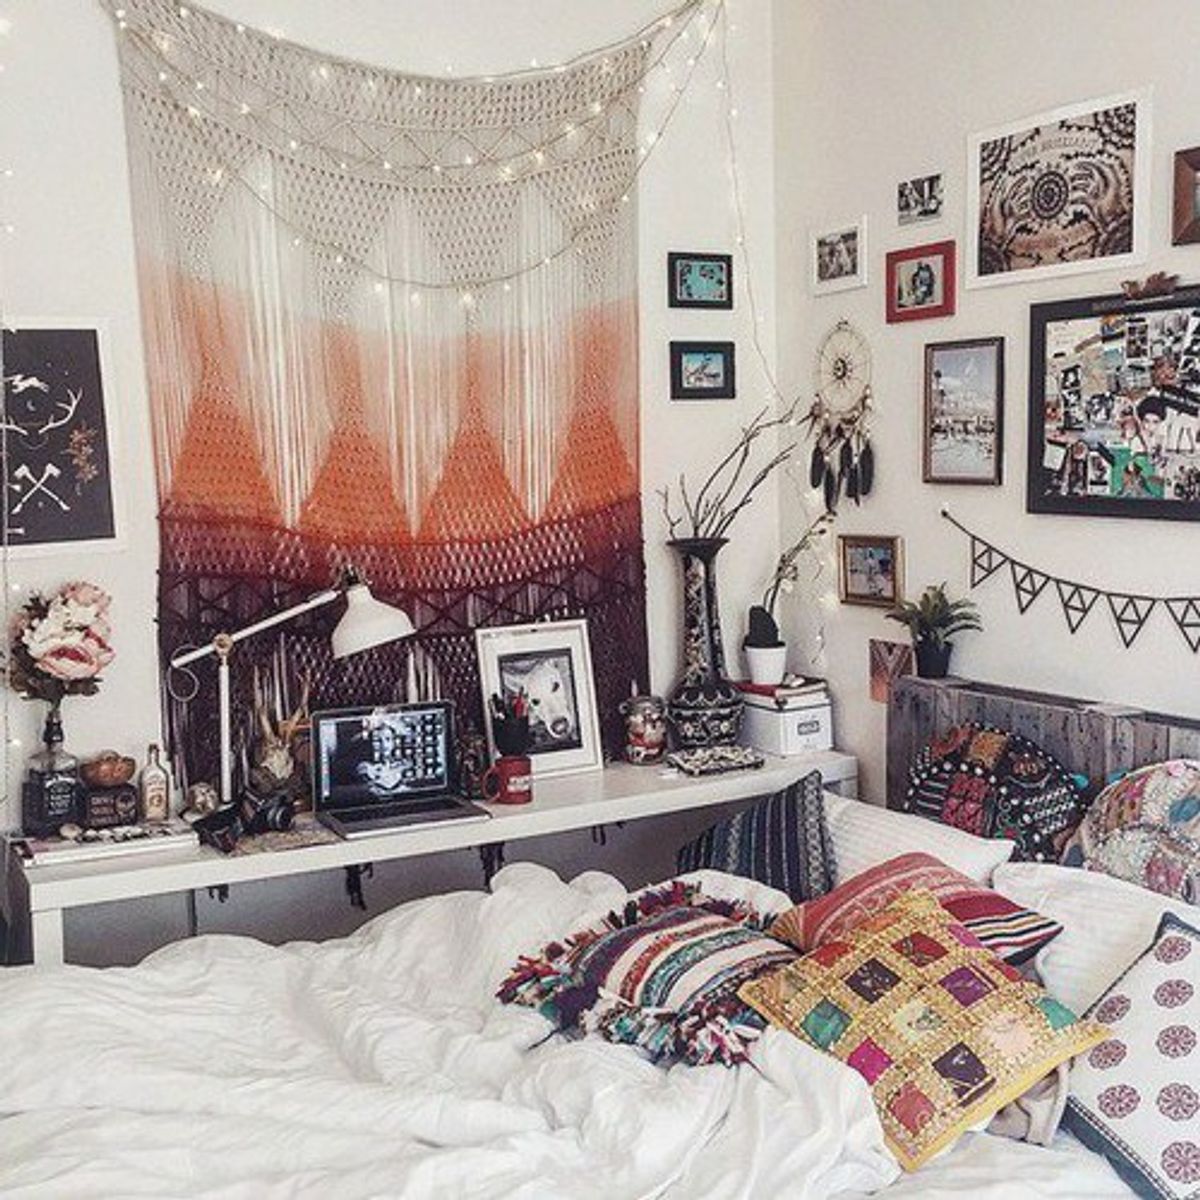 Seven Reasons to Keep Your Dorm Room Clean